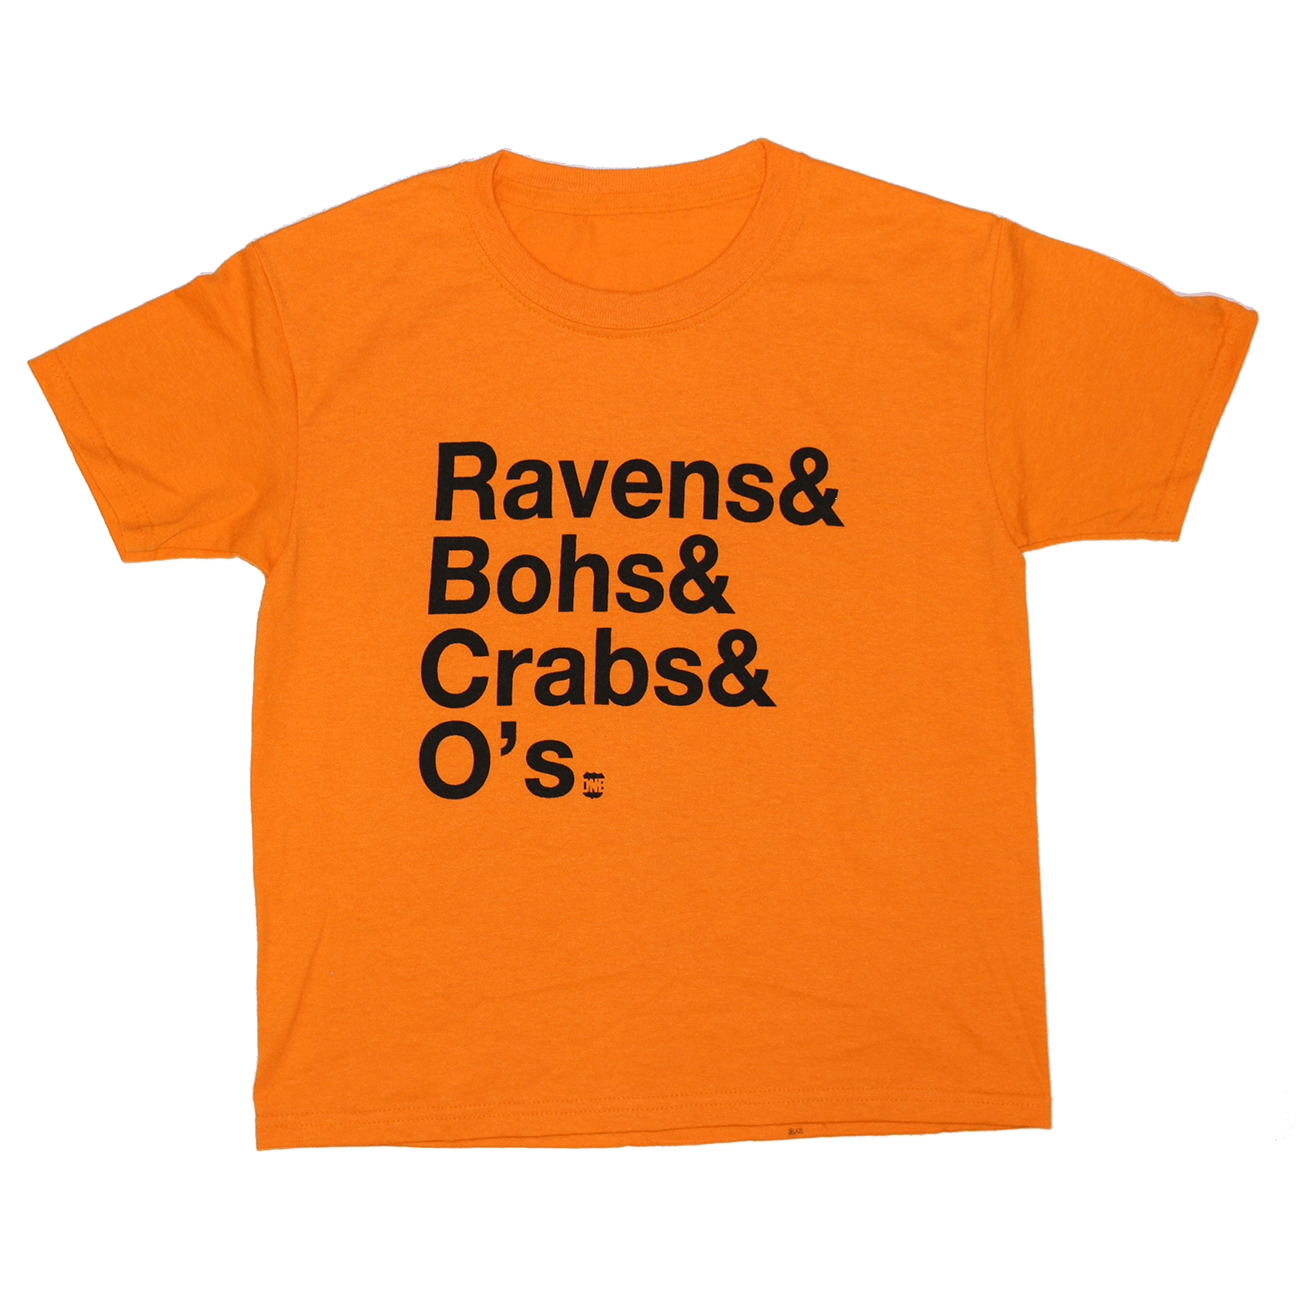 Ravens & Bohs & Crabs & O's (Orange) / *Youth* Shirt - Route One Apparel